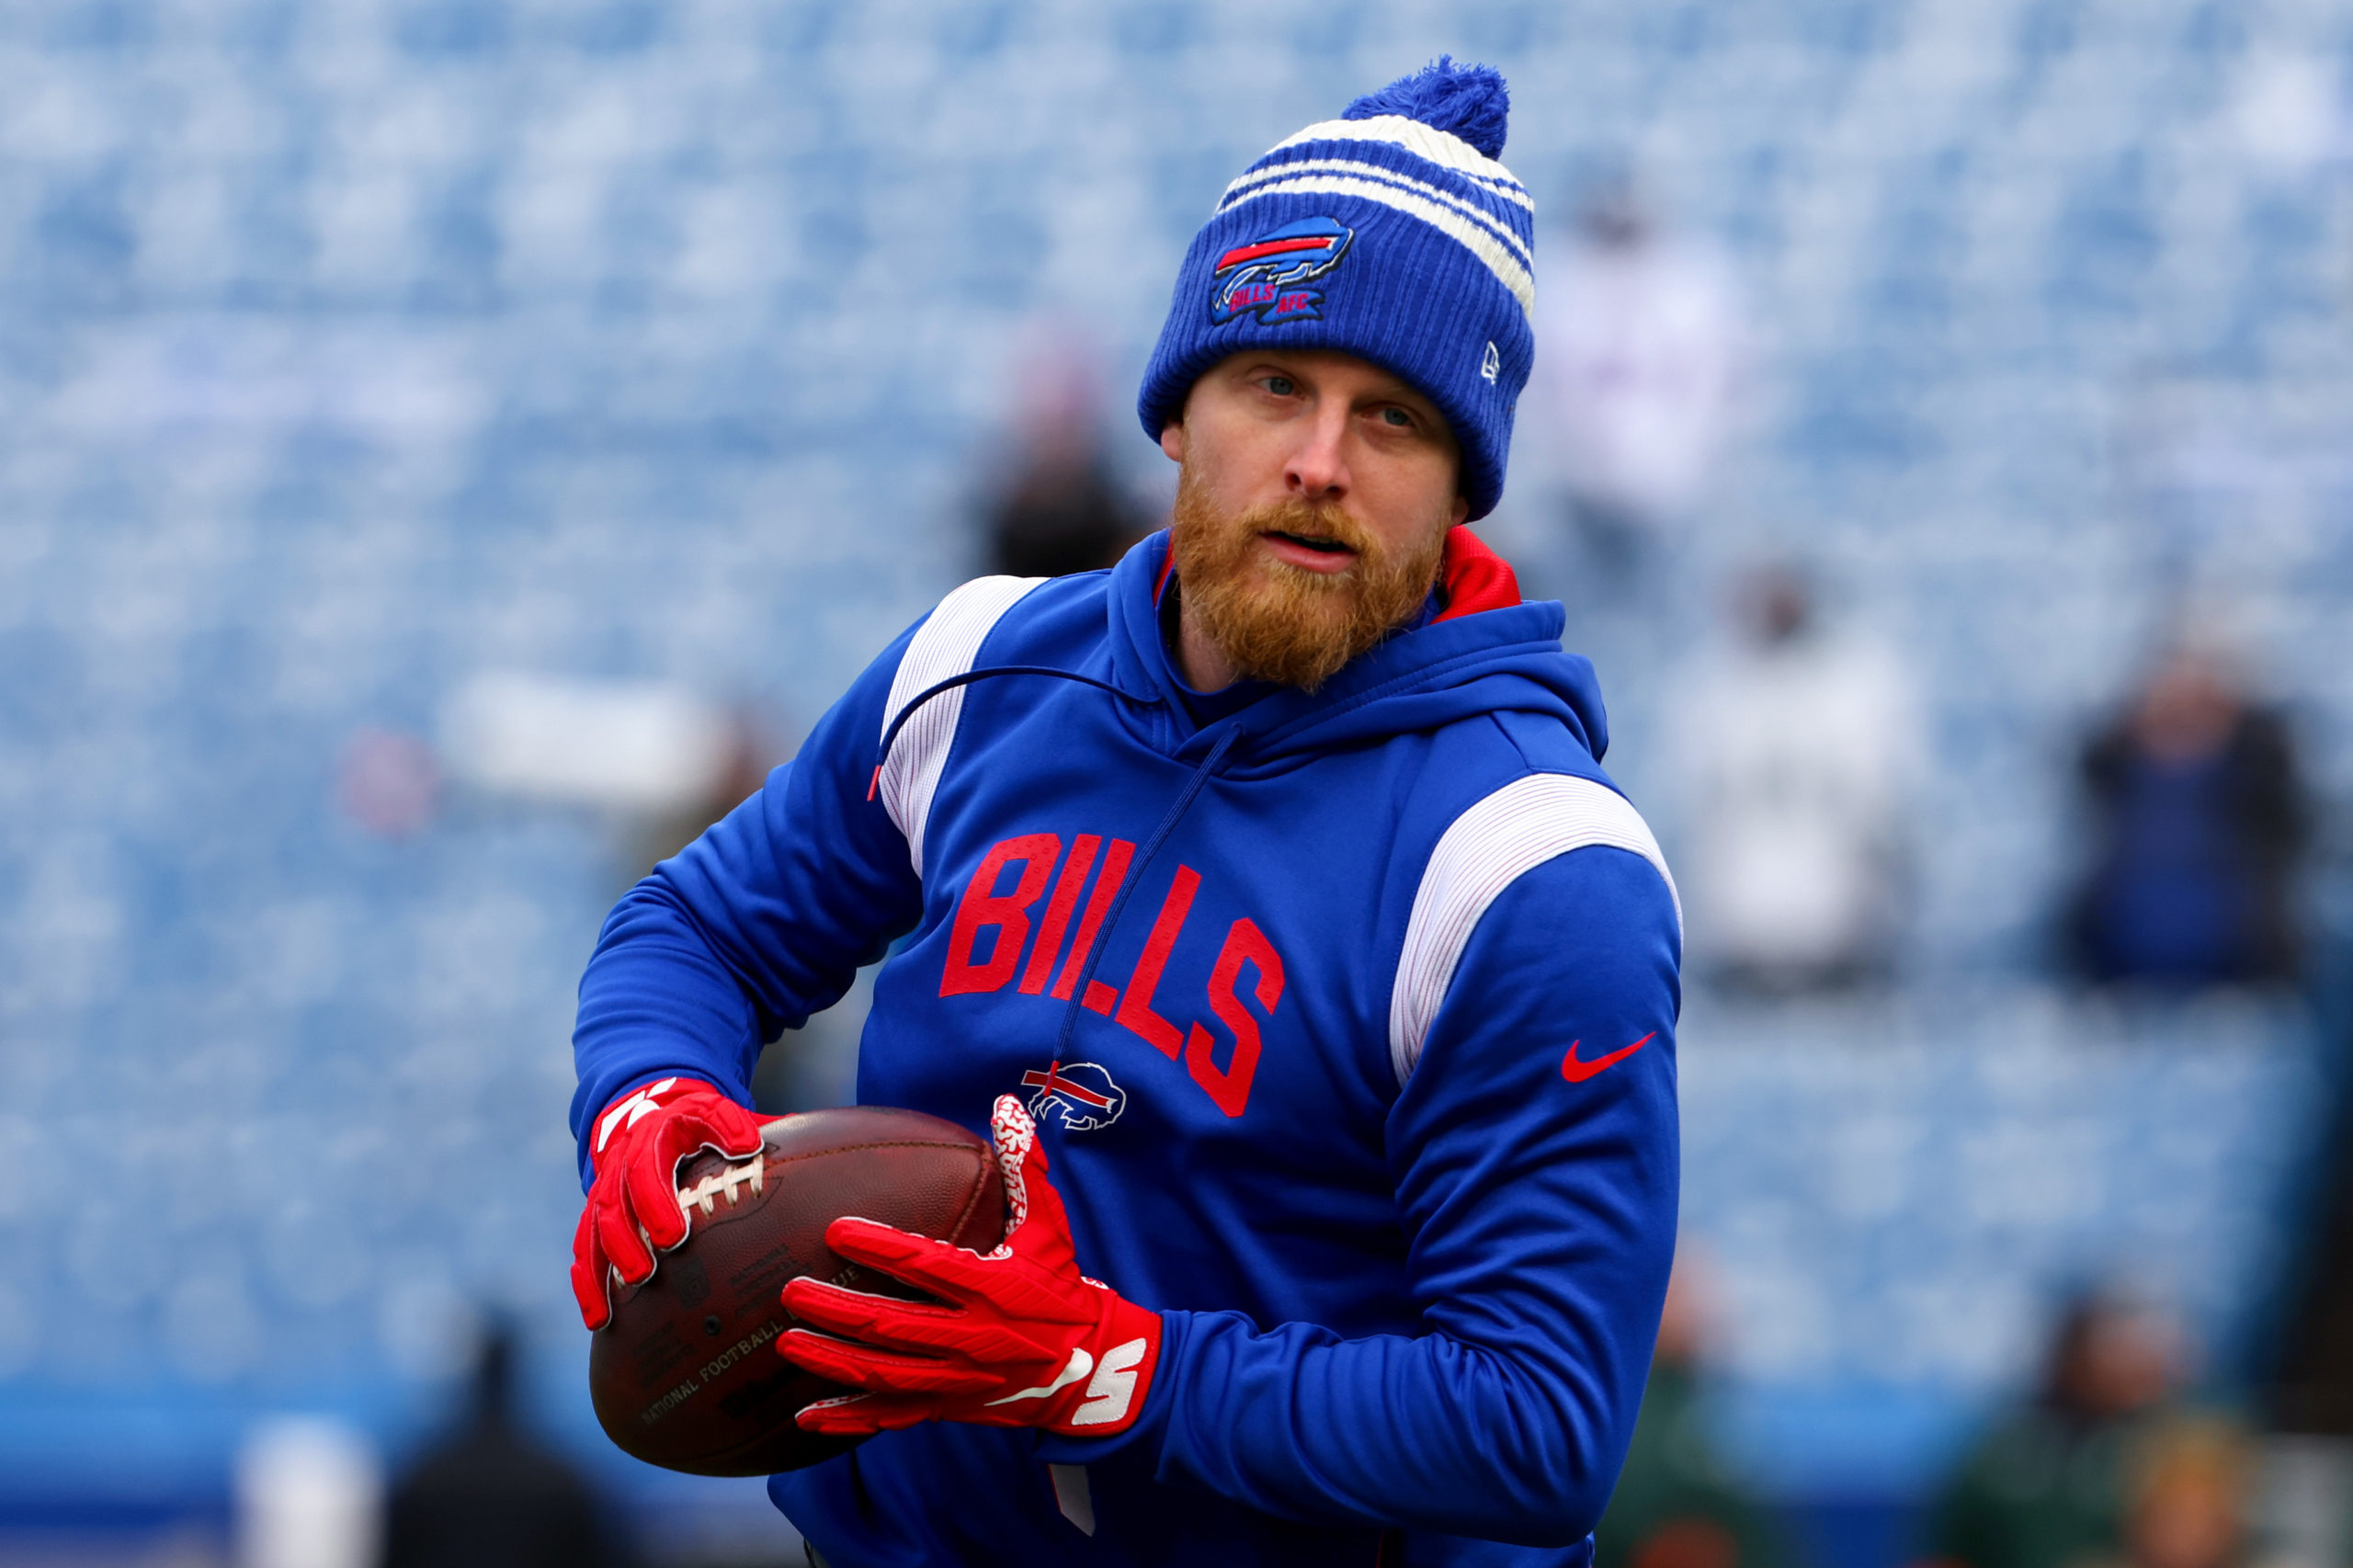 ORCHARD PARK, NEW YORK - JANUARY 15: Cole Beasley #11 of the Buffalo Bills warms up prior to a game against the Miami Dolphins in the AFC Wild Card playoff game at Highmark Stadium on January 15, 2023 in Orchard Park, New York. Timothy T Ludwig/Getty Images